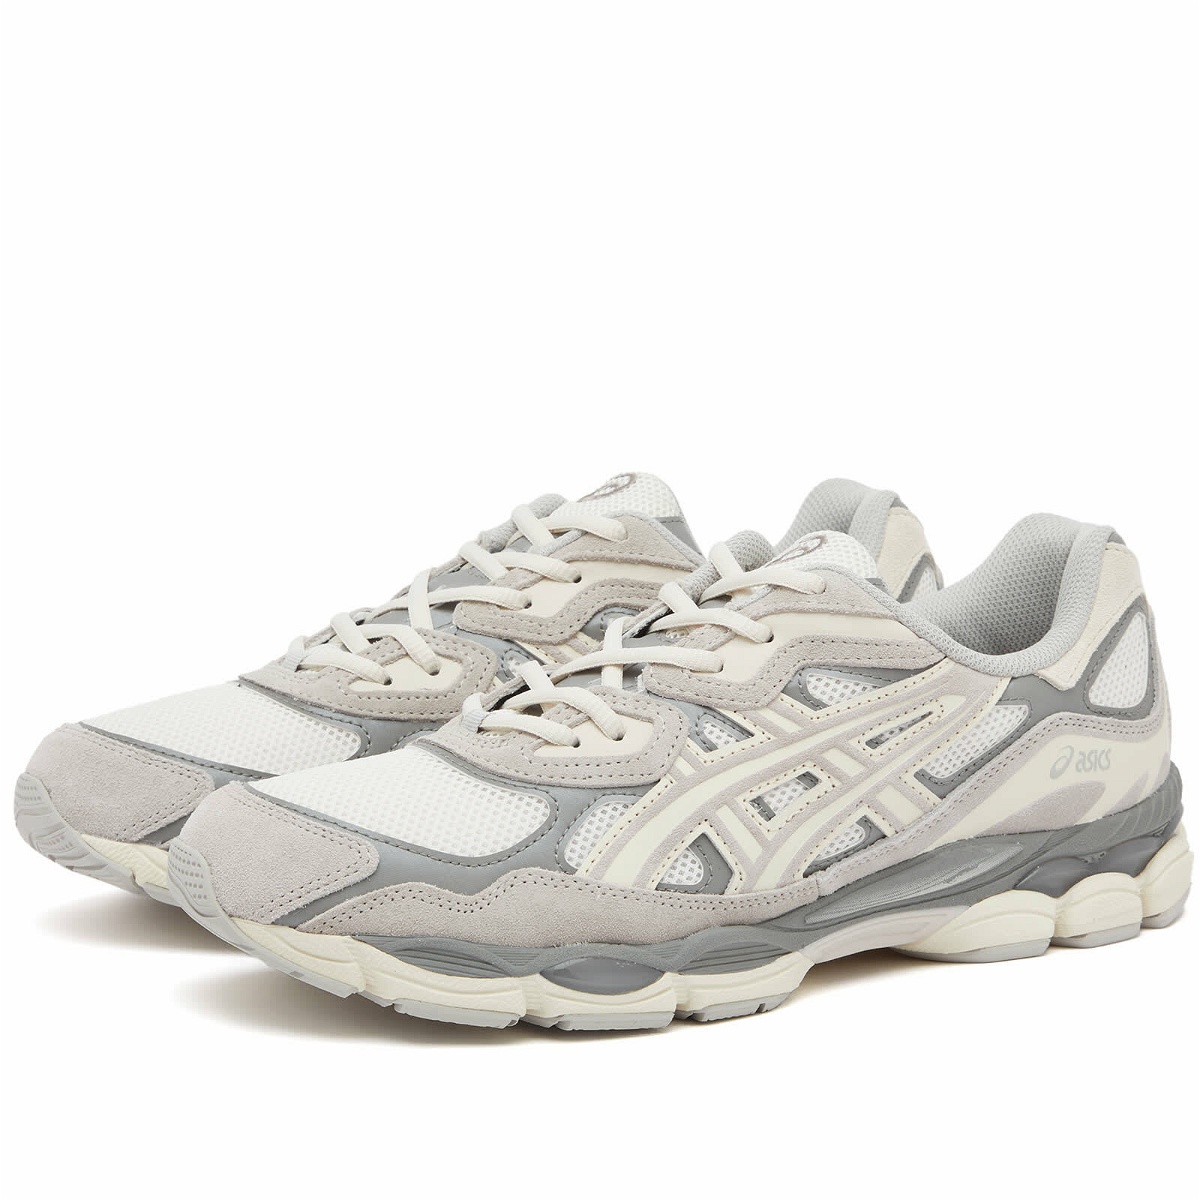 Photo: Asics Gel-Nyc Sneakers in Cream/Oyster Grey